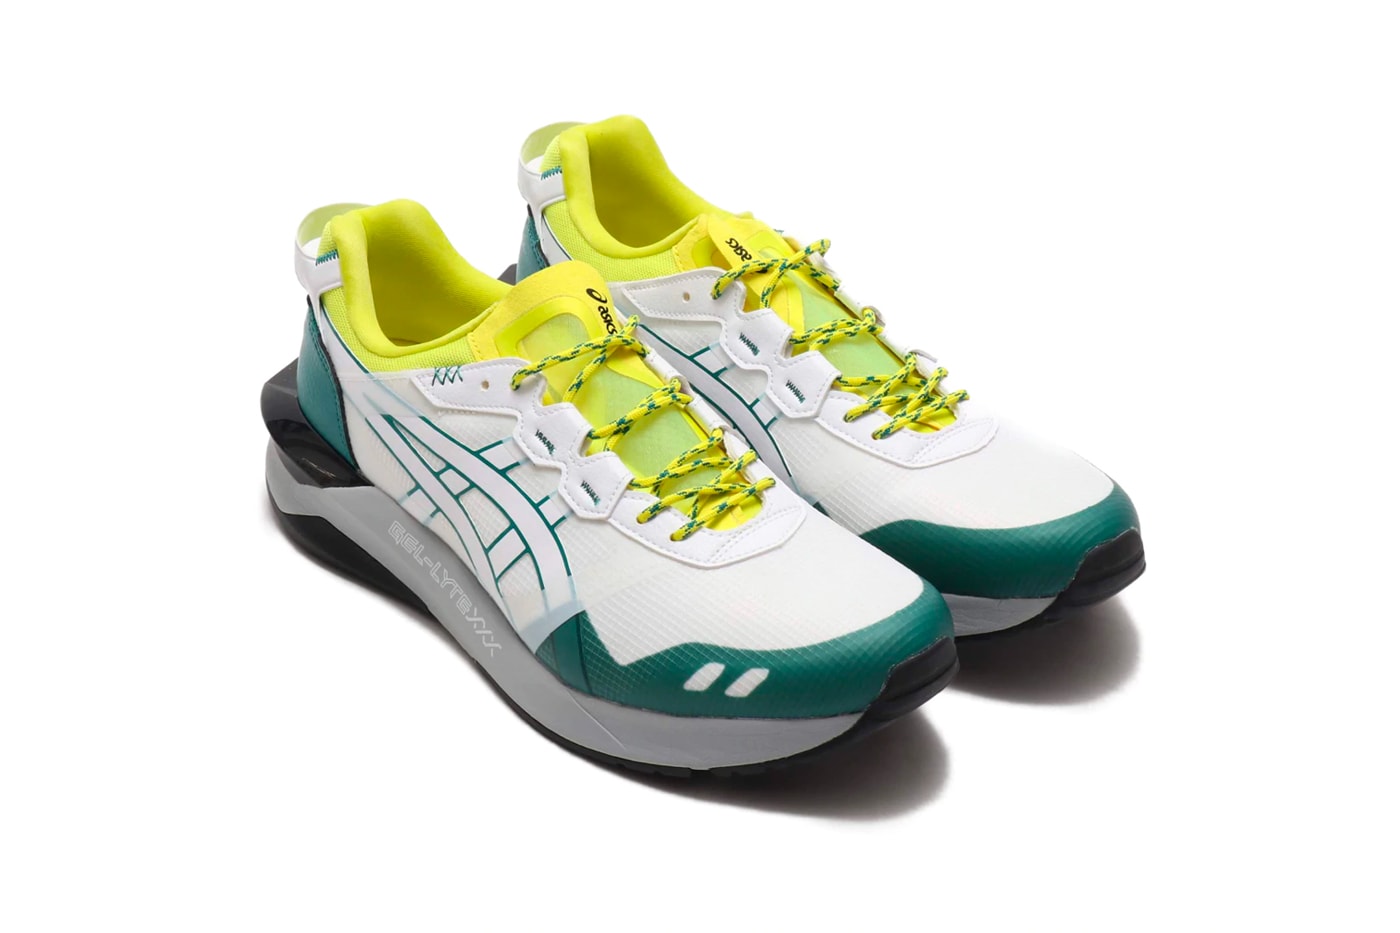 ASICS GEL Lyte XXX WHITE Y WHITE FSCR 1021a263 101 1021a263 102 menswear streetwear shoes sneakers footwear trainers runners spring summer 2020 collection japanese